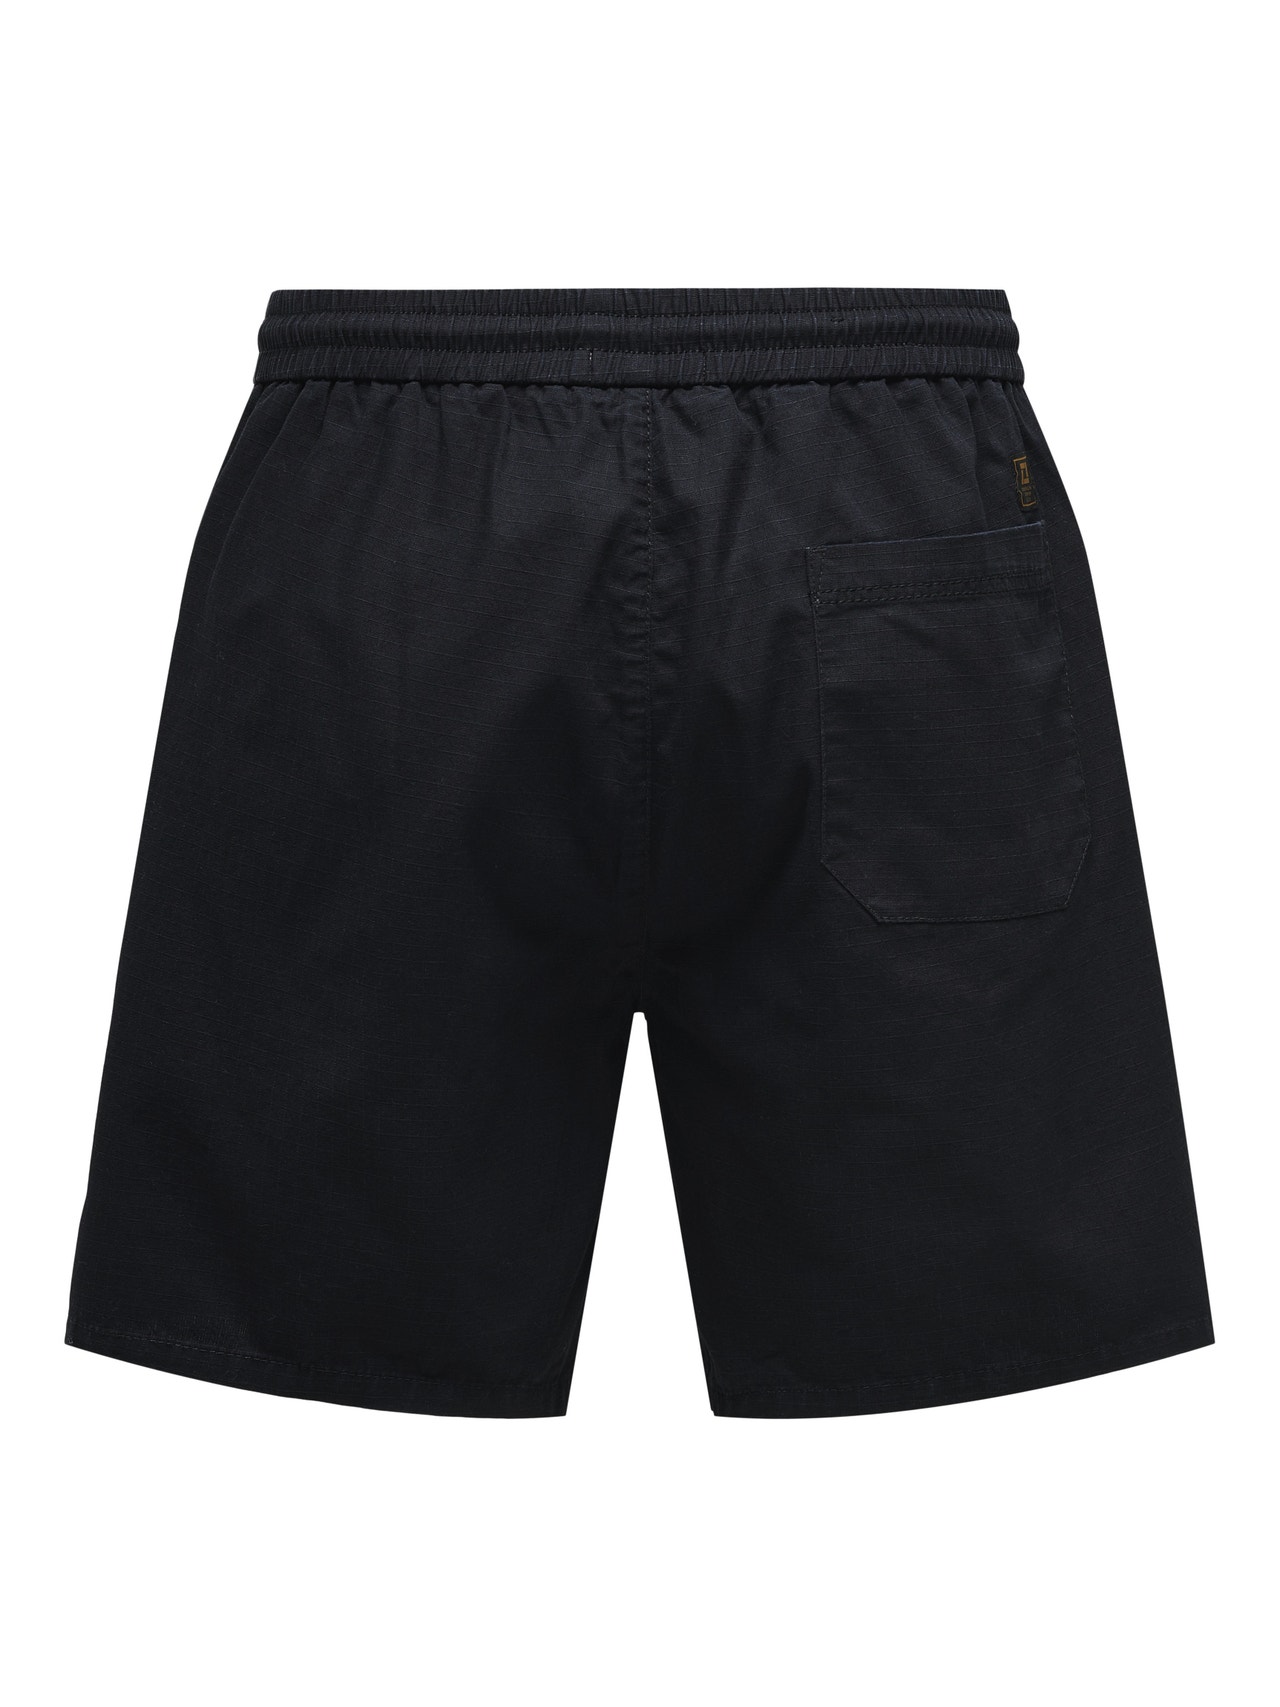 ONLY & SONS Normal passform Shorts -Black - 22029691